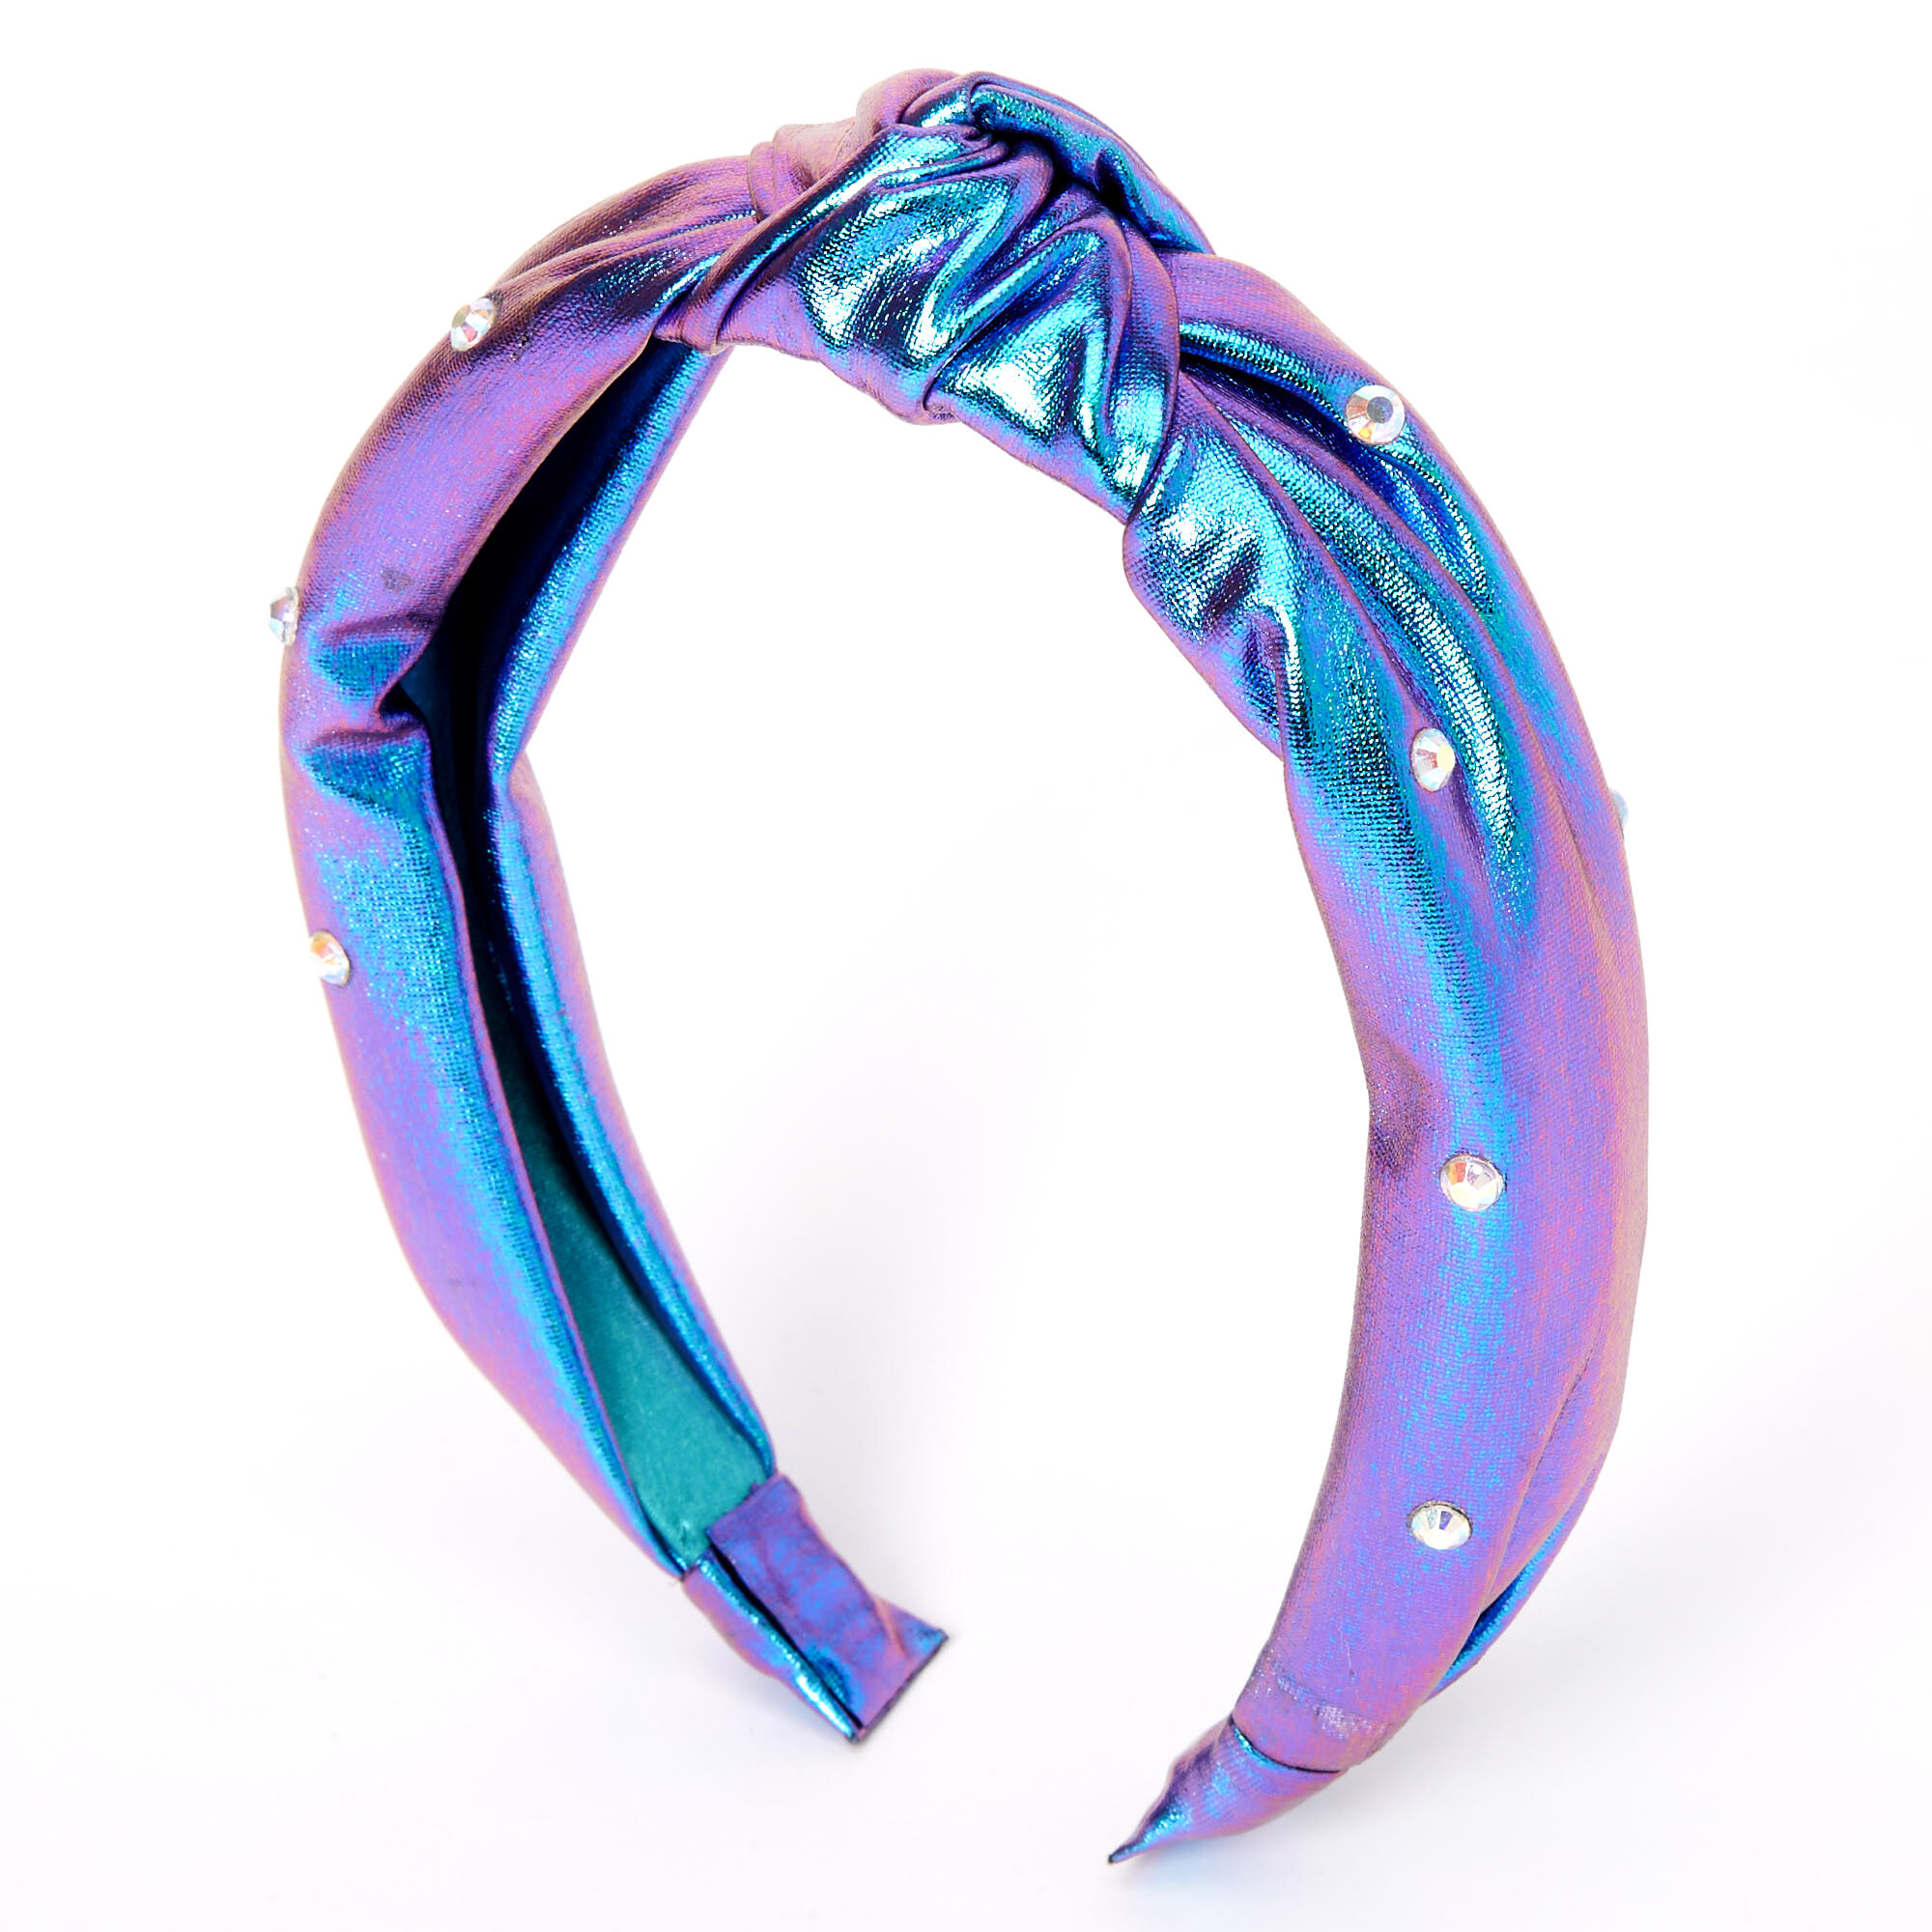 View Claires Metallic Oil Slick Mermaid Knotted Headband Purple information